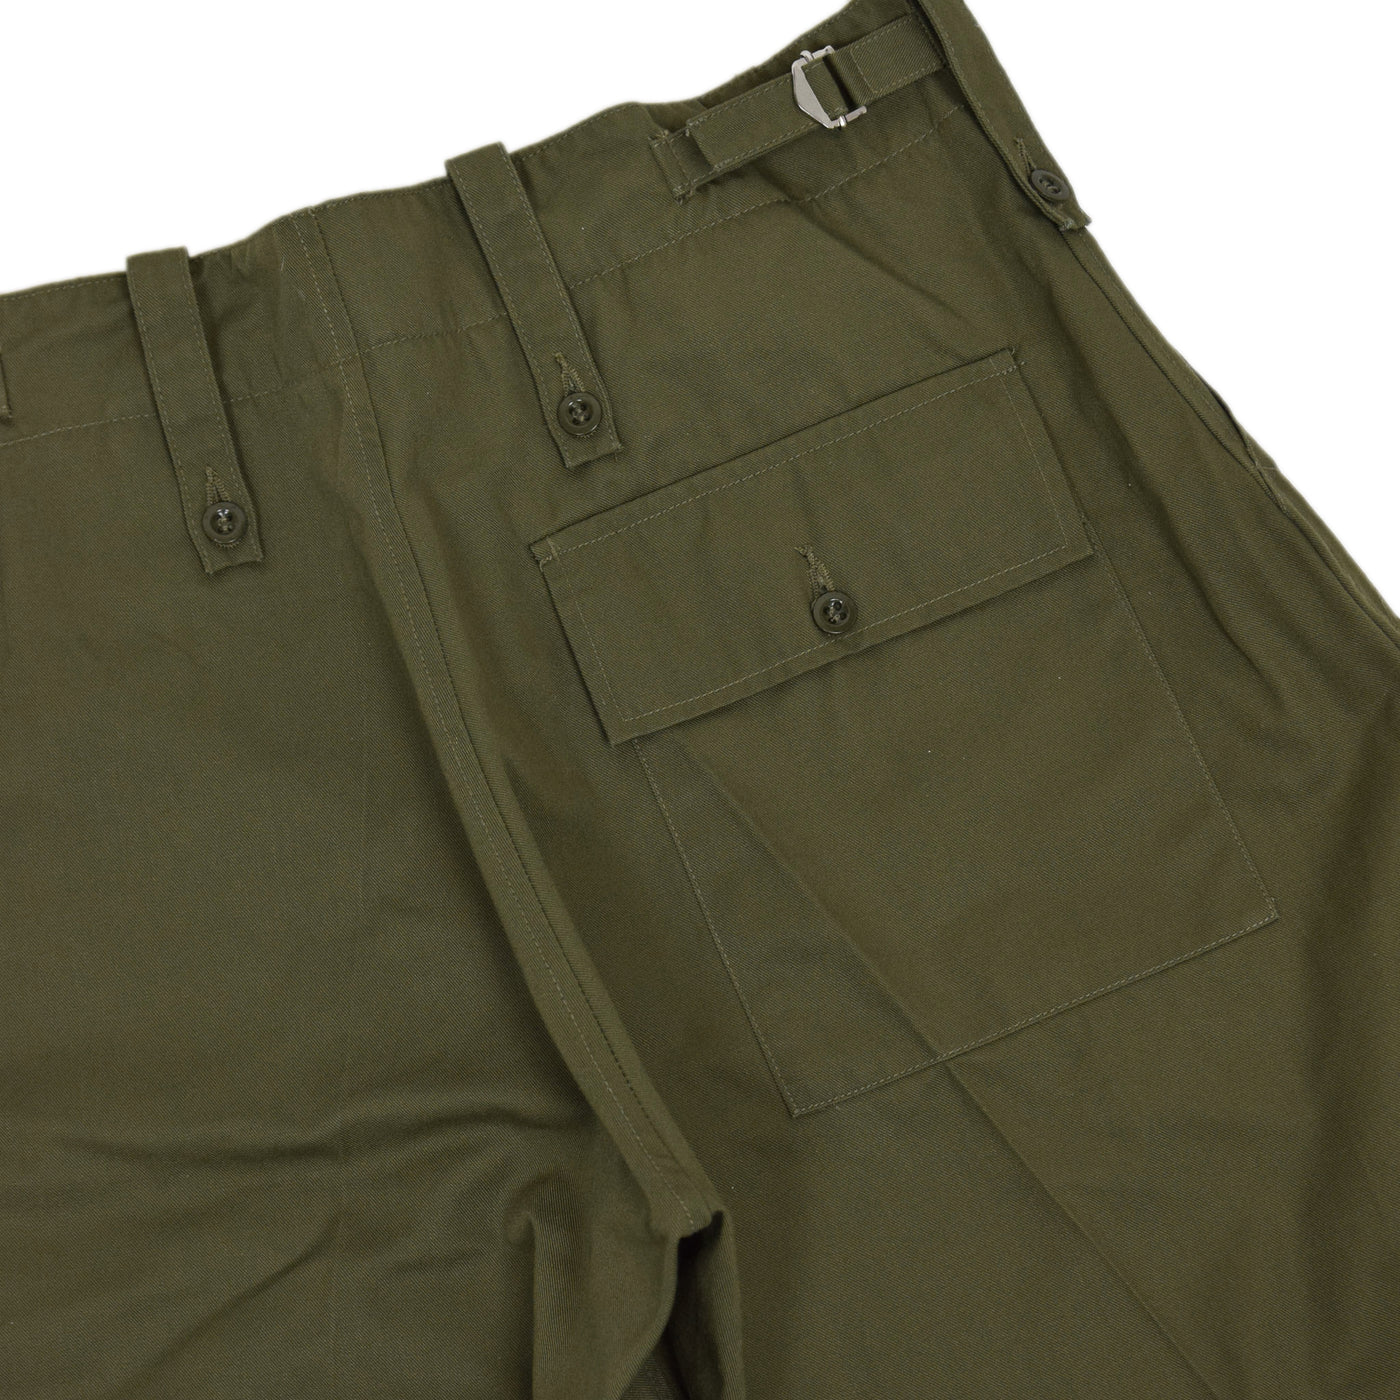 Vintage 90s British Military Lightweight Olive Green Fatigue Trousers 32 - 34 W back detail